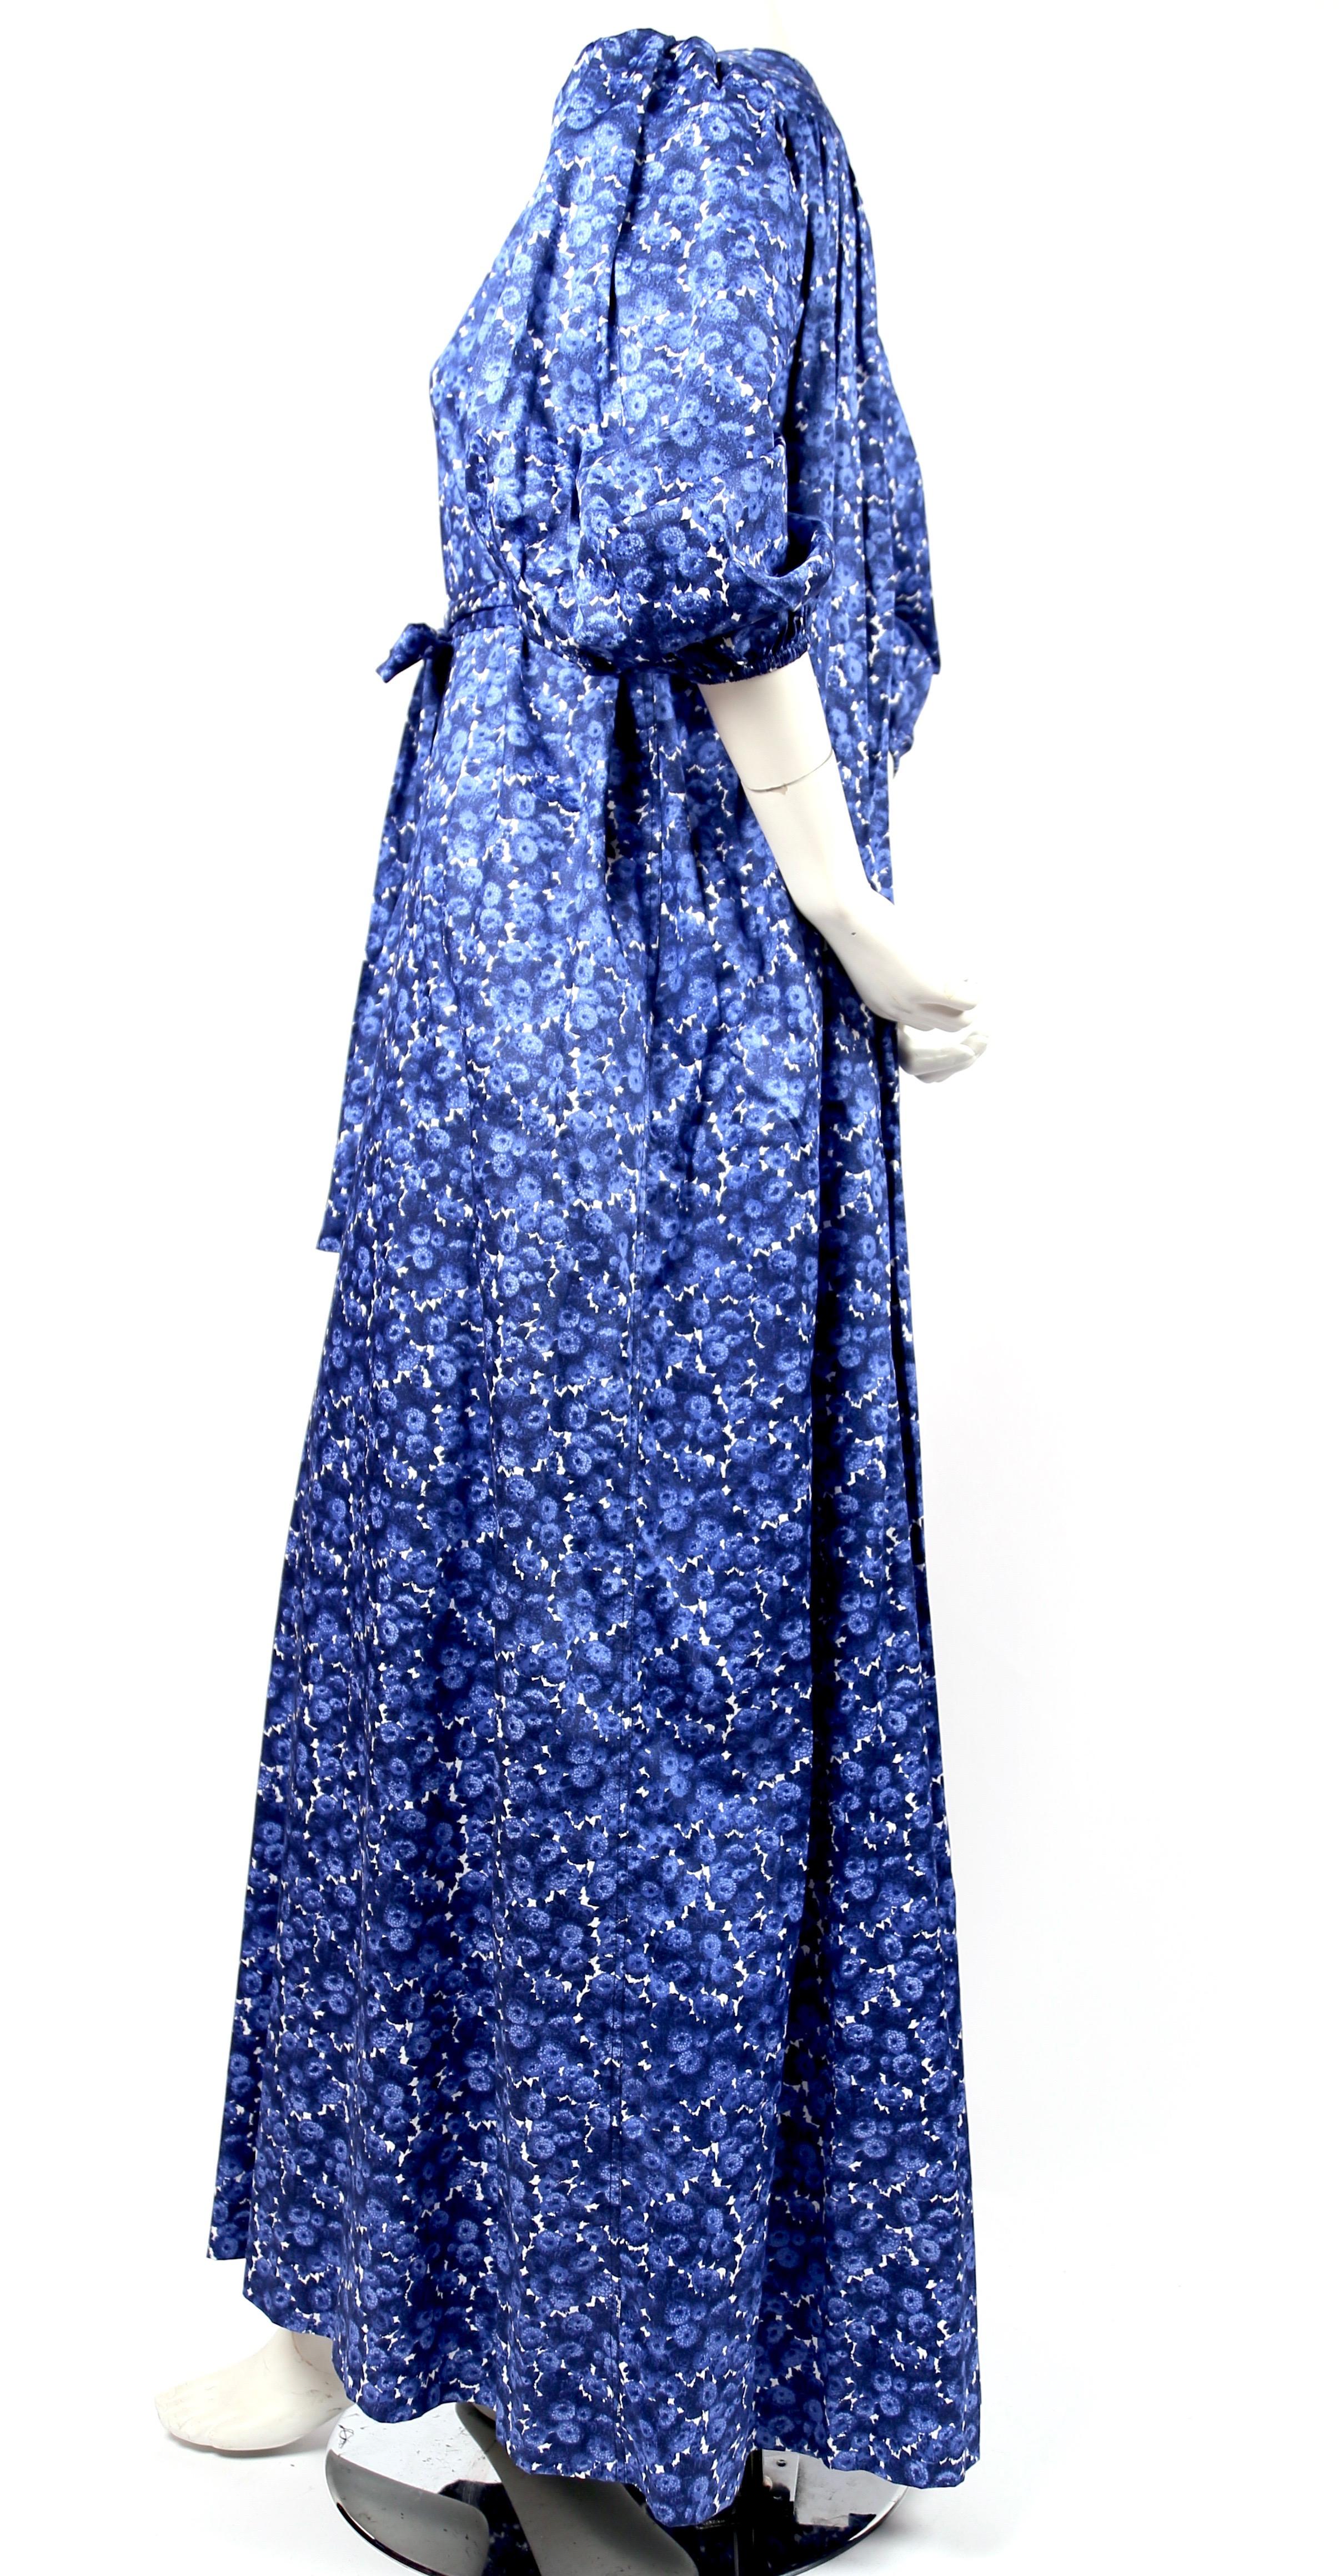  Vivid, blue floral printed, cotton maxi dress with belt designed by Yves Saint Laurent dating to the 1970's. Labeled a French size 36. Approximate measurements: shoulder 13